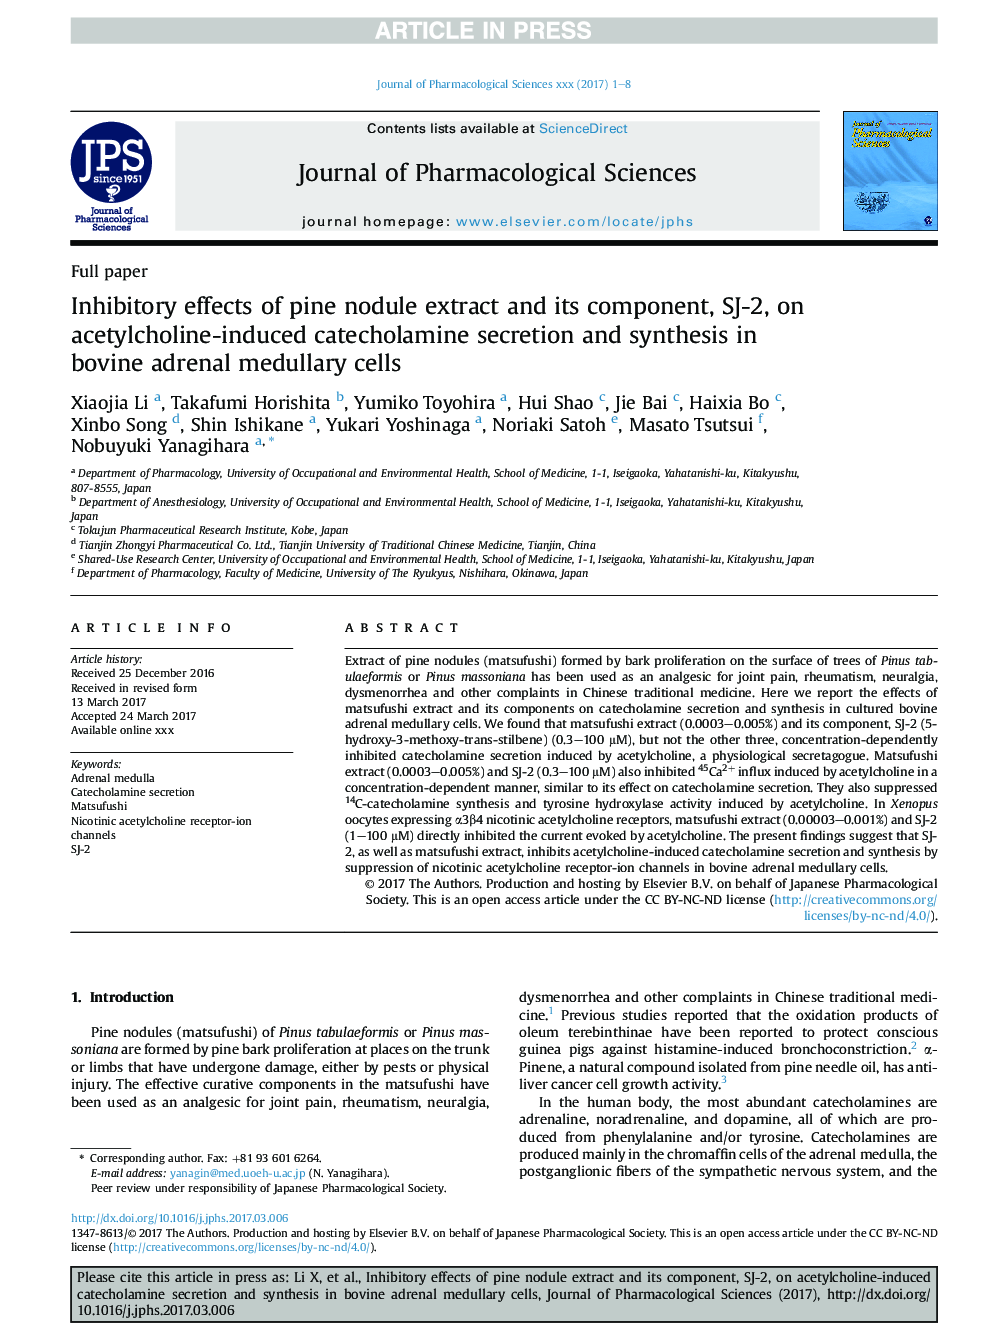 Inhibitory effects of pine nodule extract and its component, SJ-2, on acetylcholine-induced catecholamine secretion and synthesis in bovine adrenal medullary cells